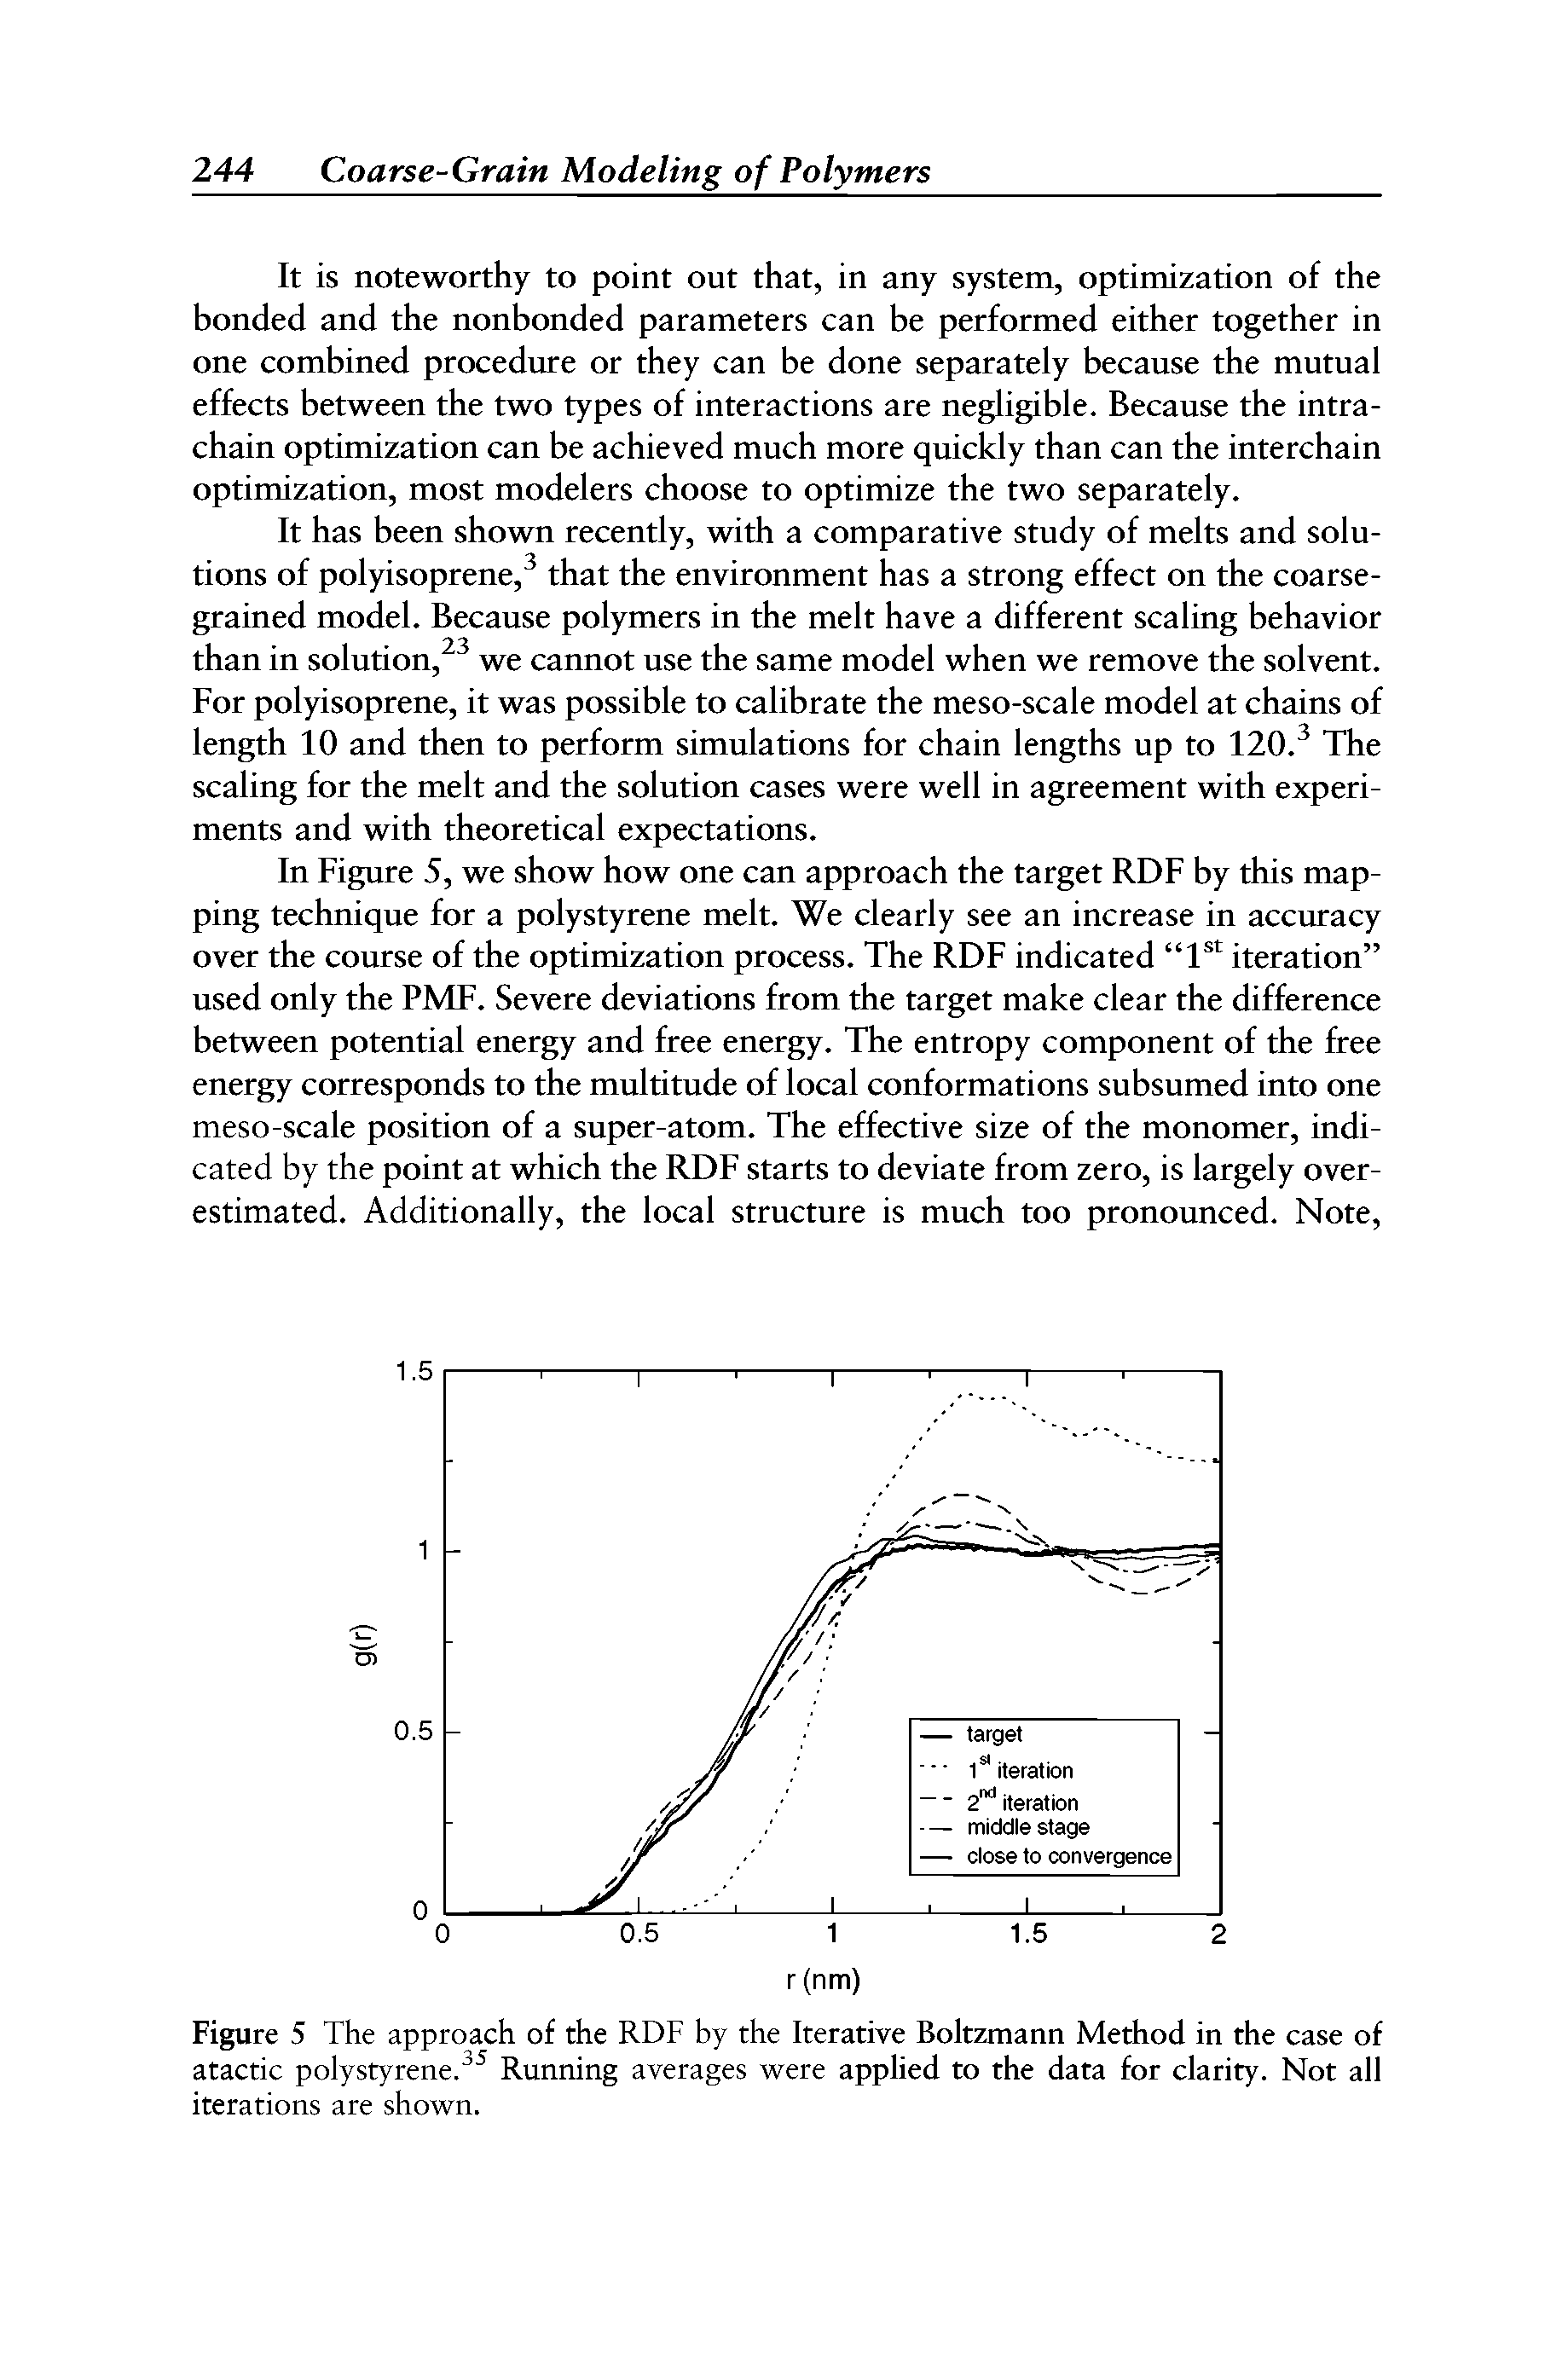 Figure 5 The approach of the RDF by the Iterative Boltzmann Method in the case of atactic polystyrene. Running averages were applied to the data for clarity. Not all iterations are shown.